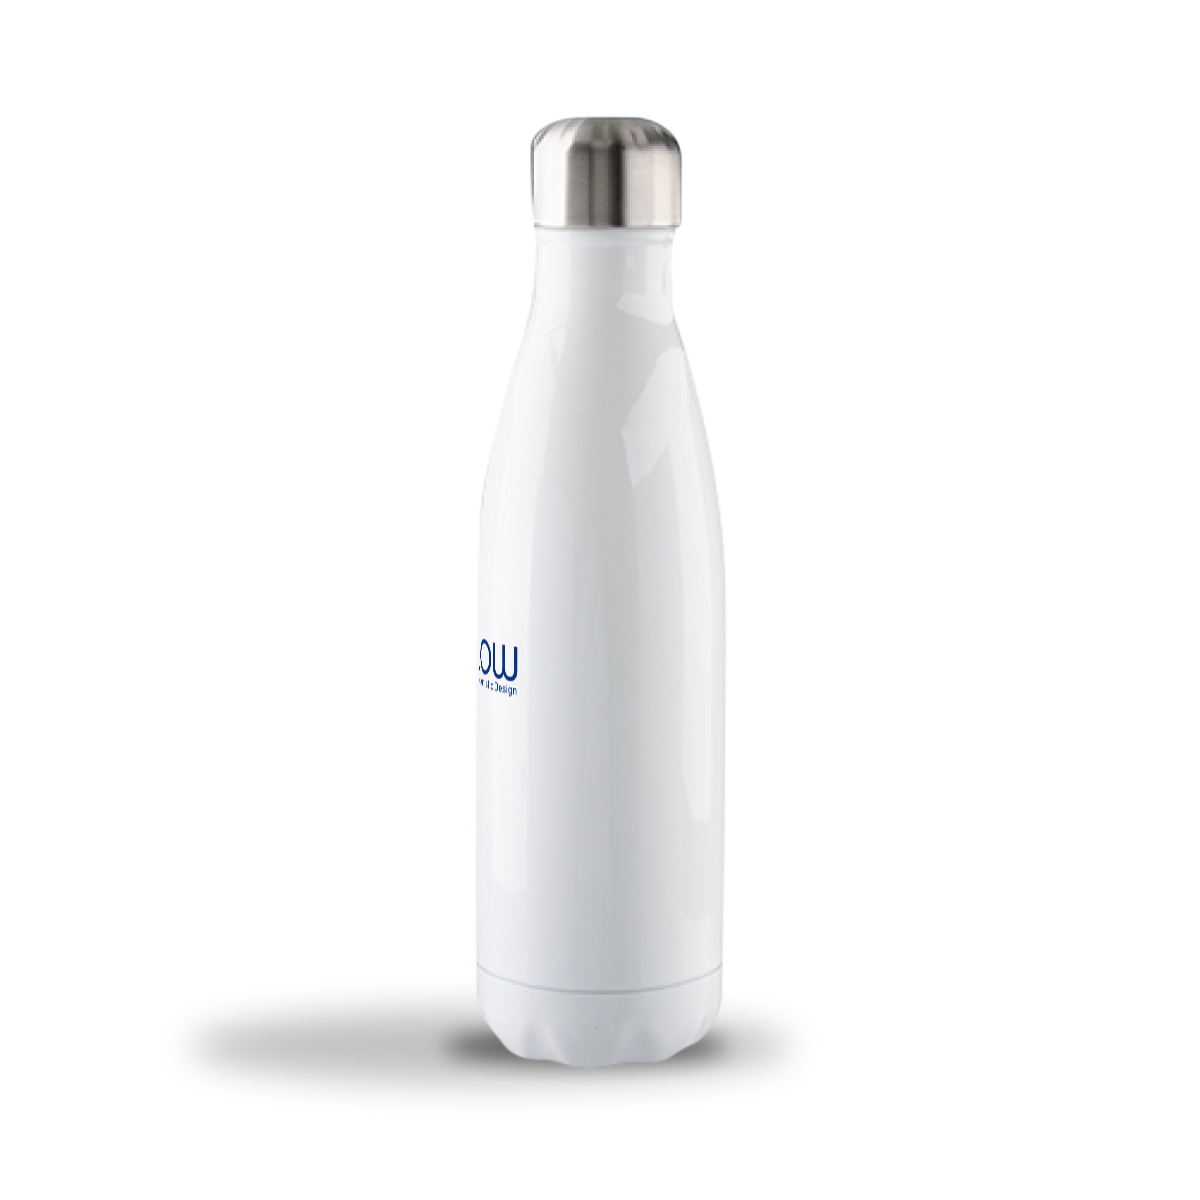 White Bottle with stainless steel interior